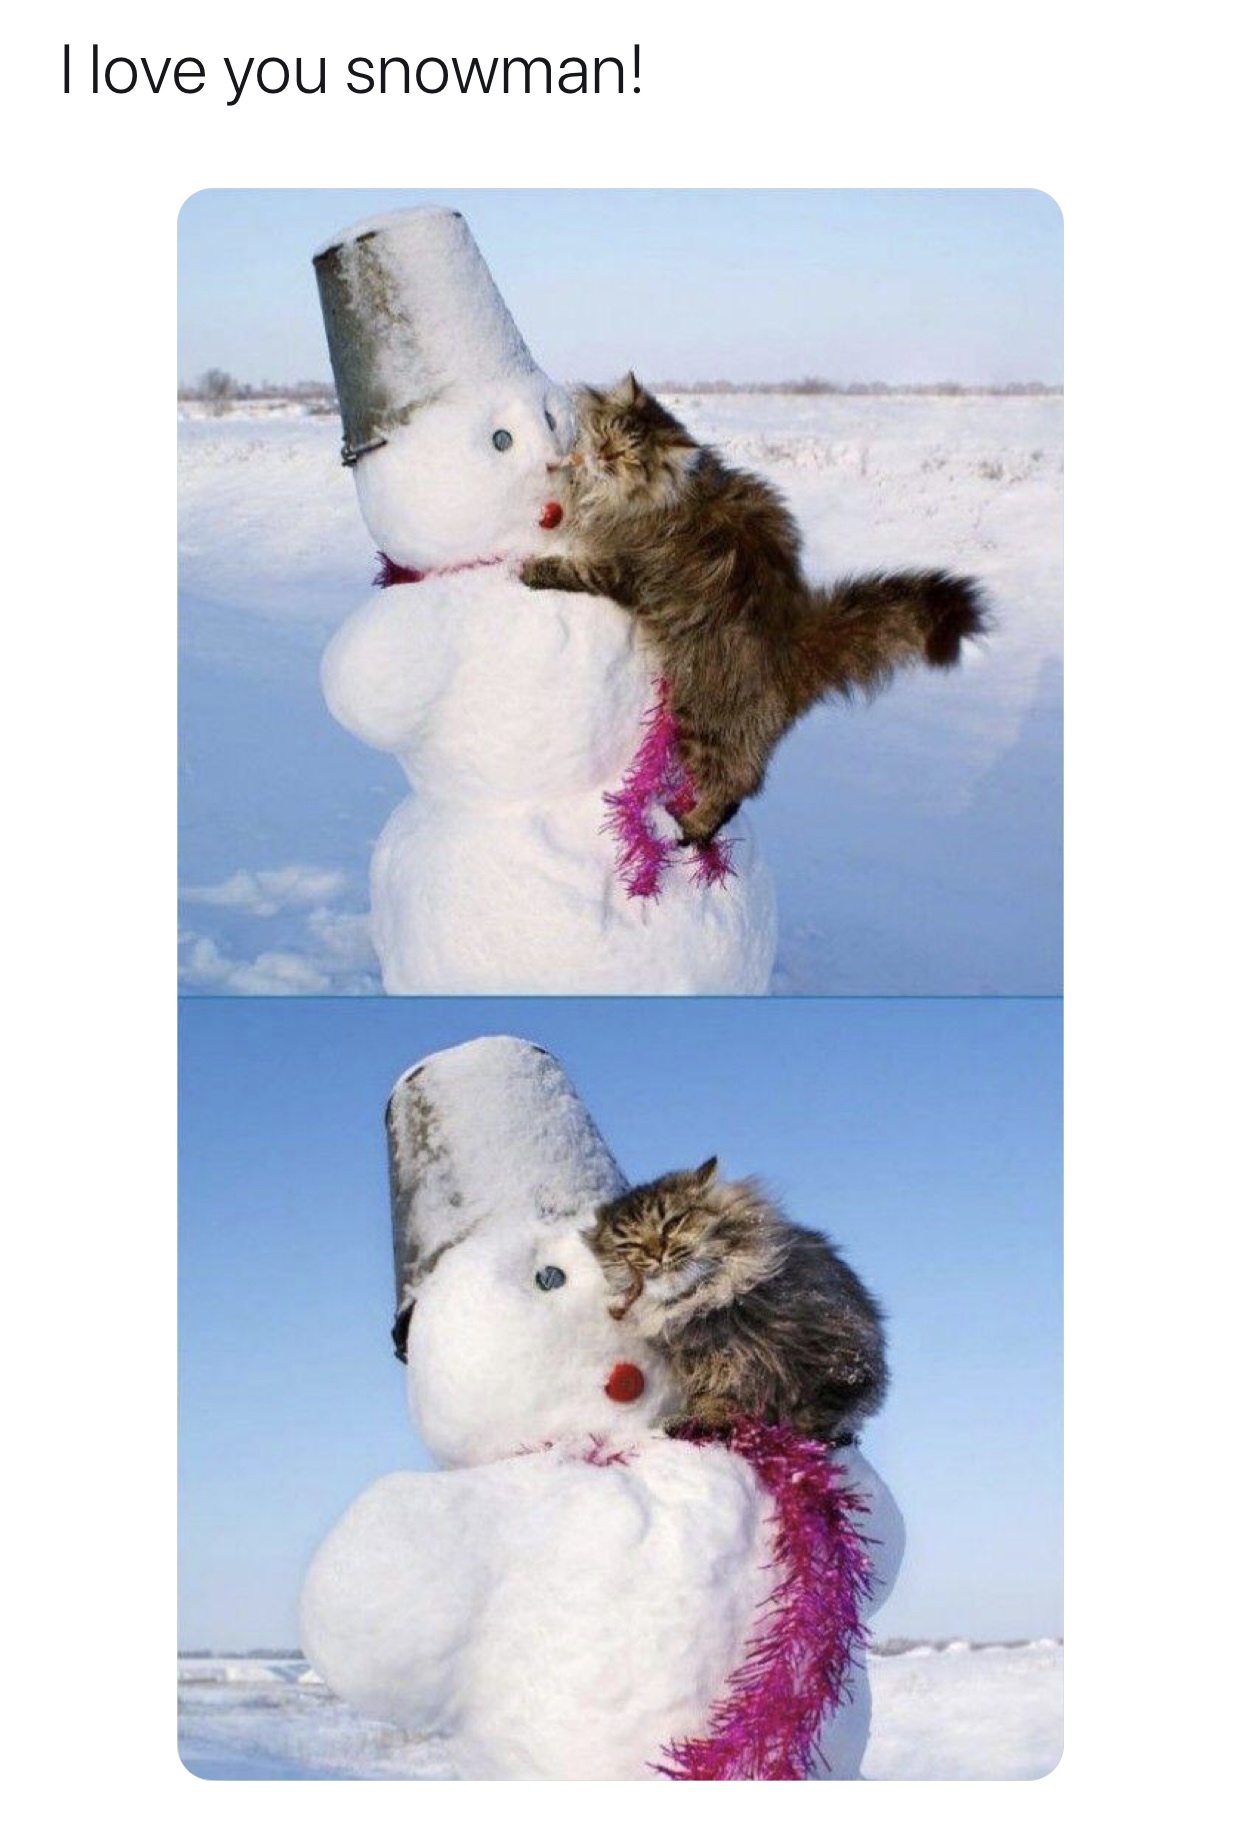 snowman with cat - I love you snowman!